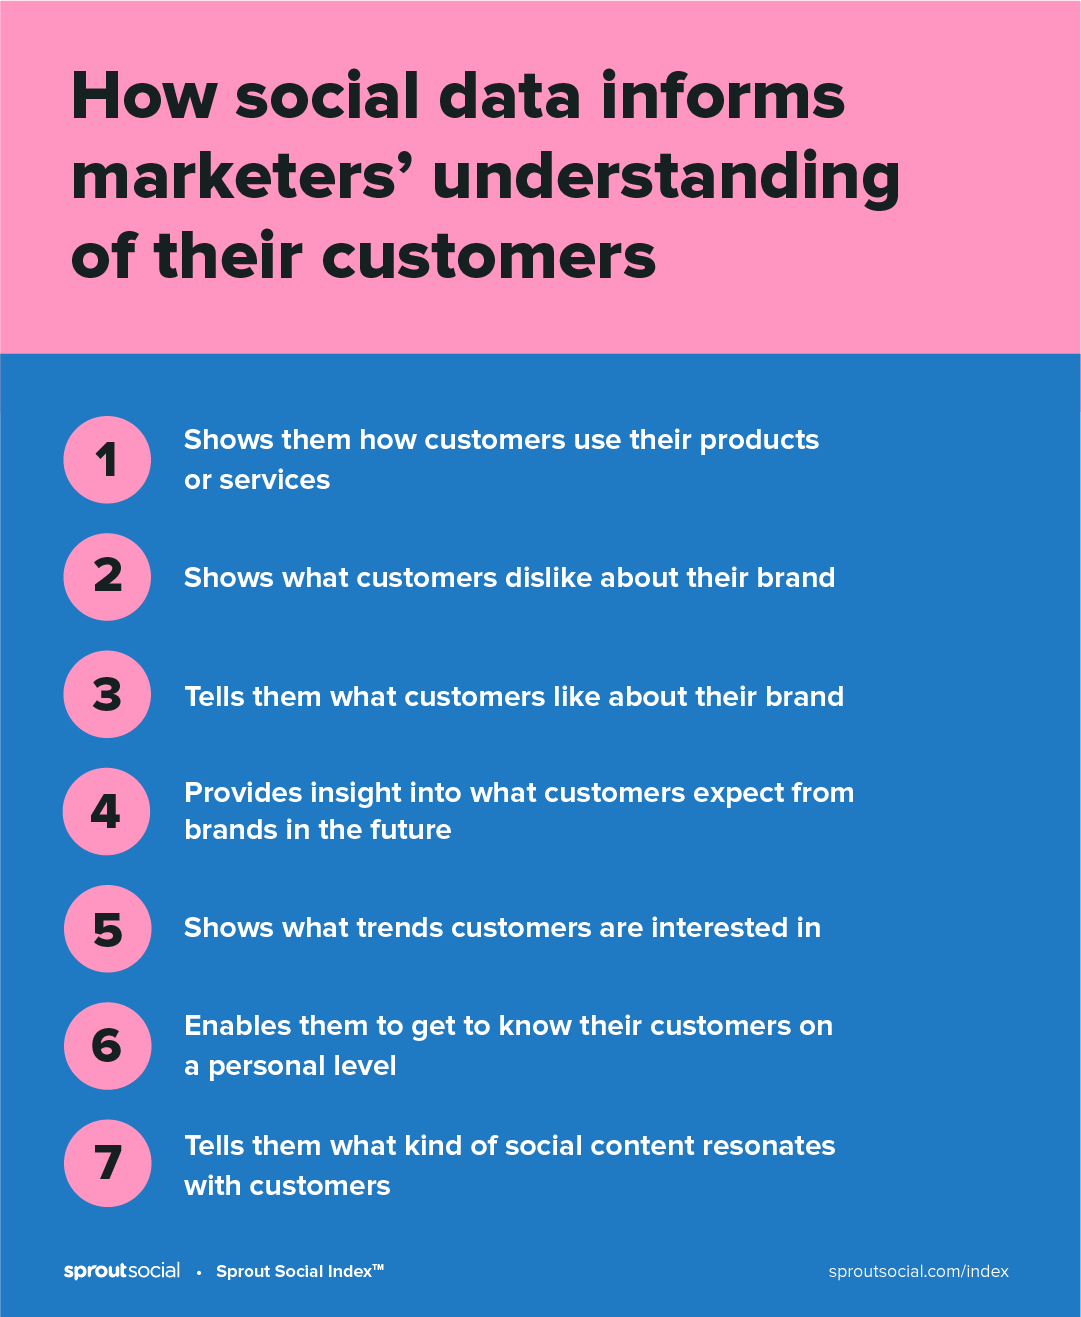 Pink and blue chart showing a ranking of how social data informs marketers' understanding of their customers